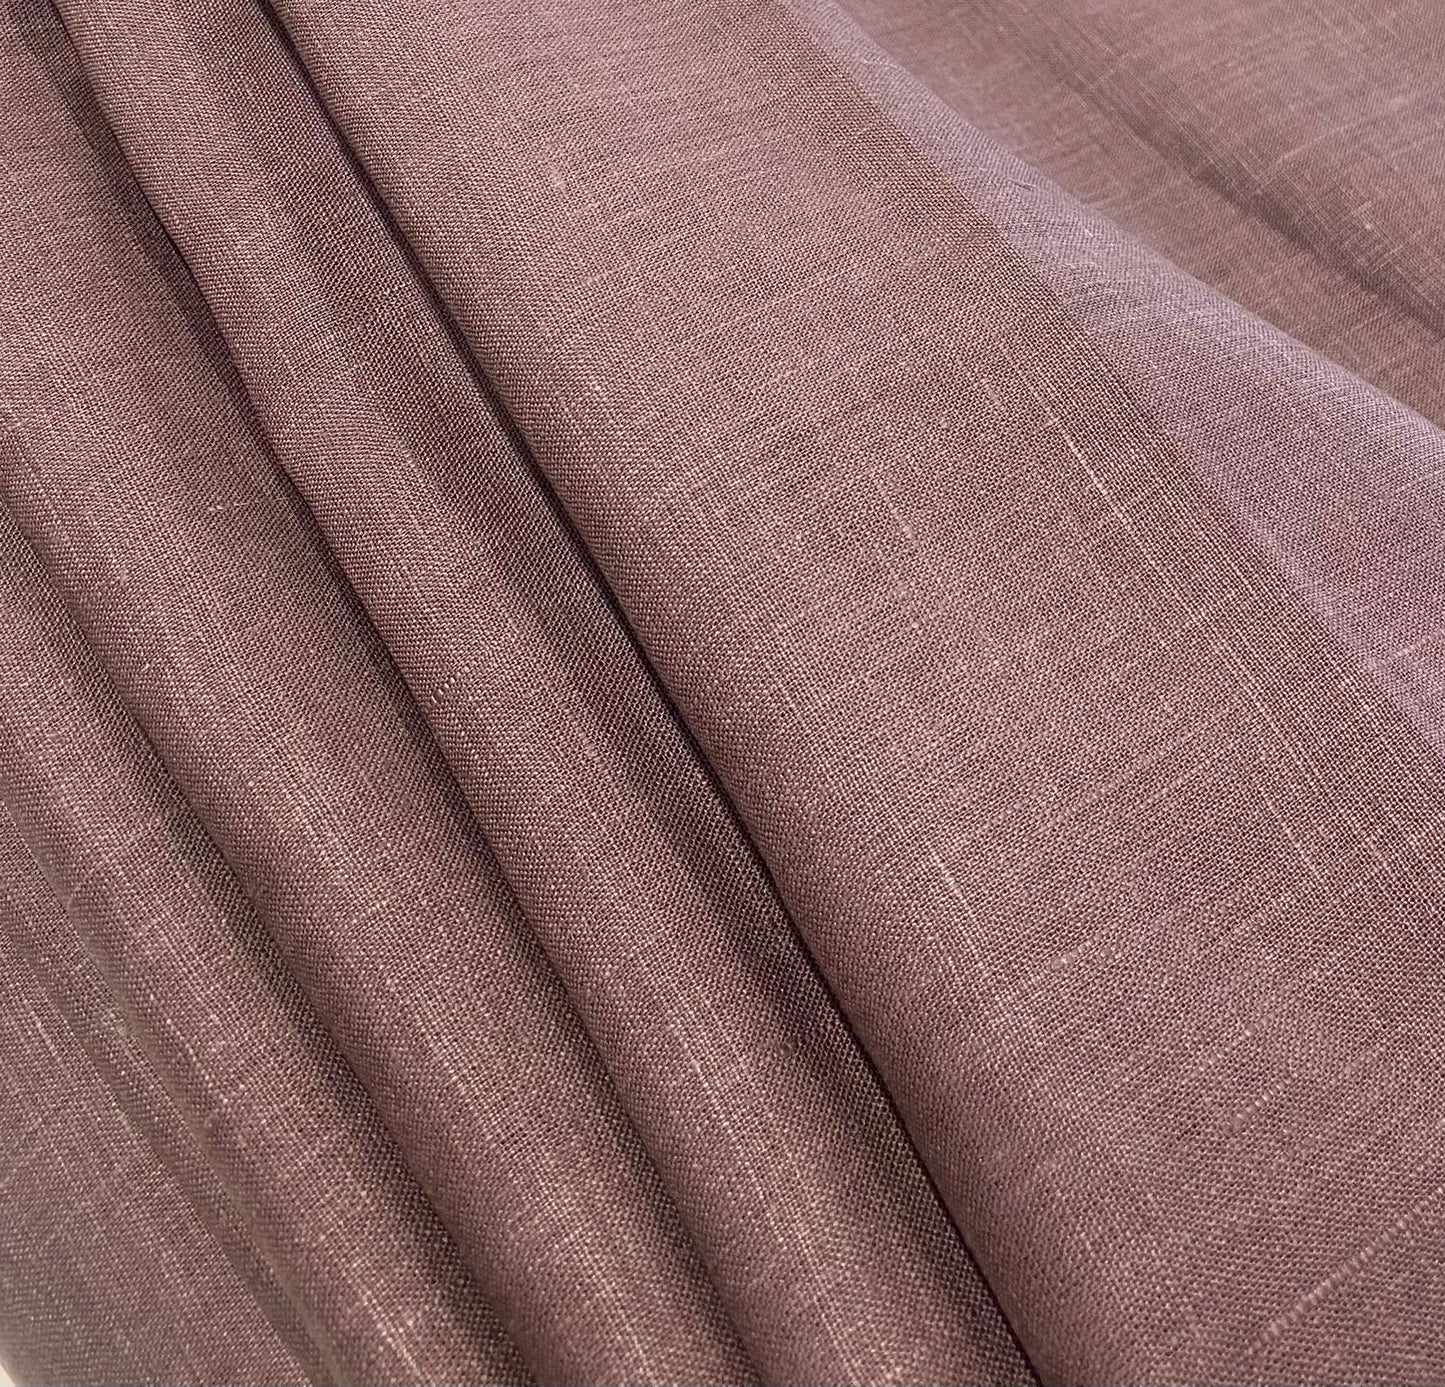 Brownish Maroon Solid Colour- Dyed Premium Linen Fabric LO-203